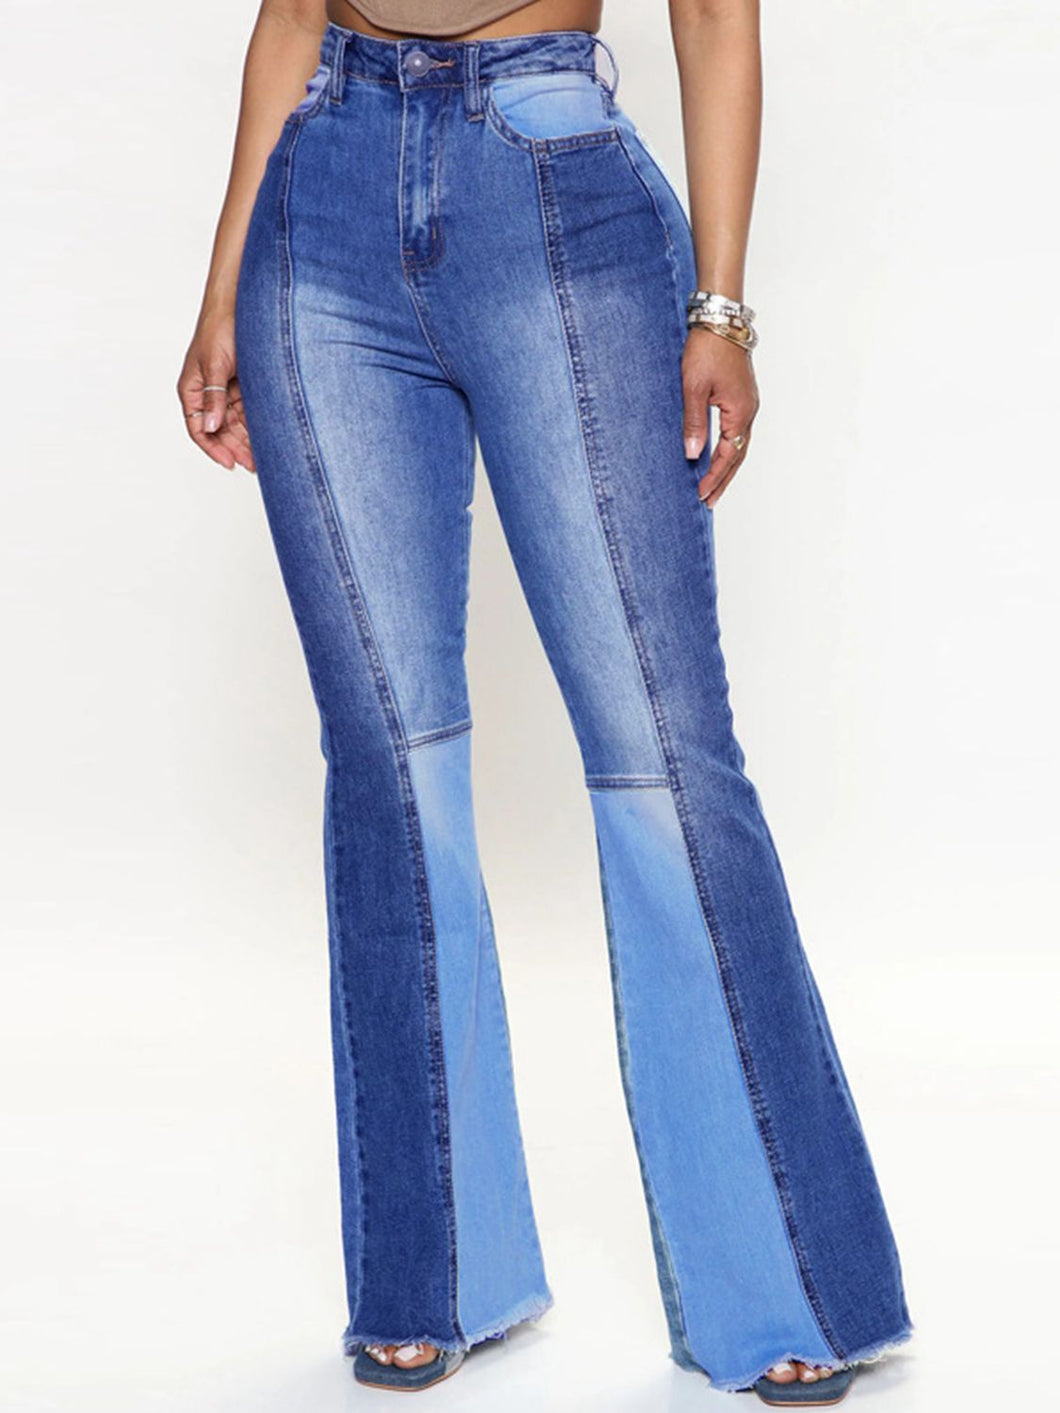 This Is Your Moment Wide Leg Jeans - Medium Wash